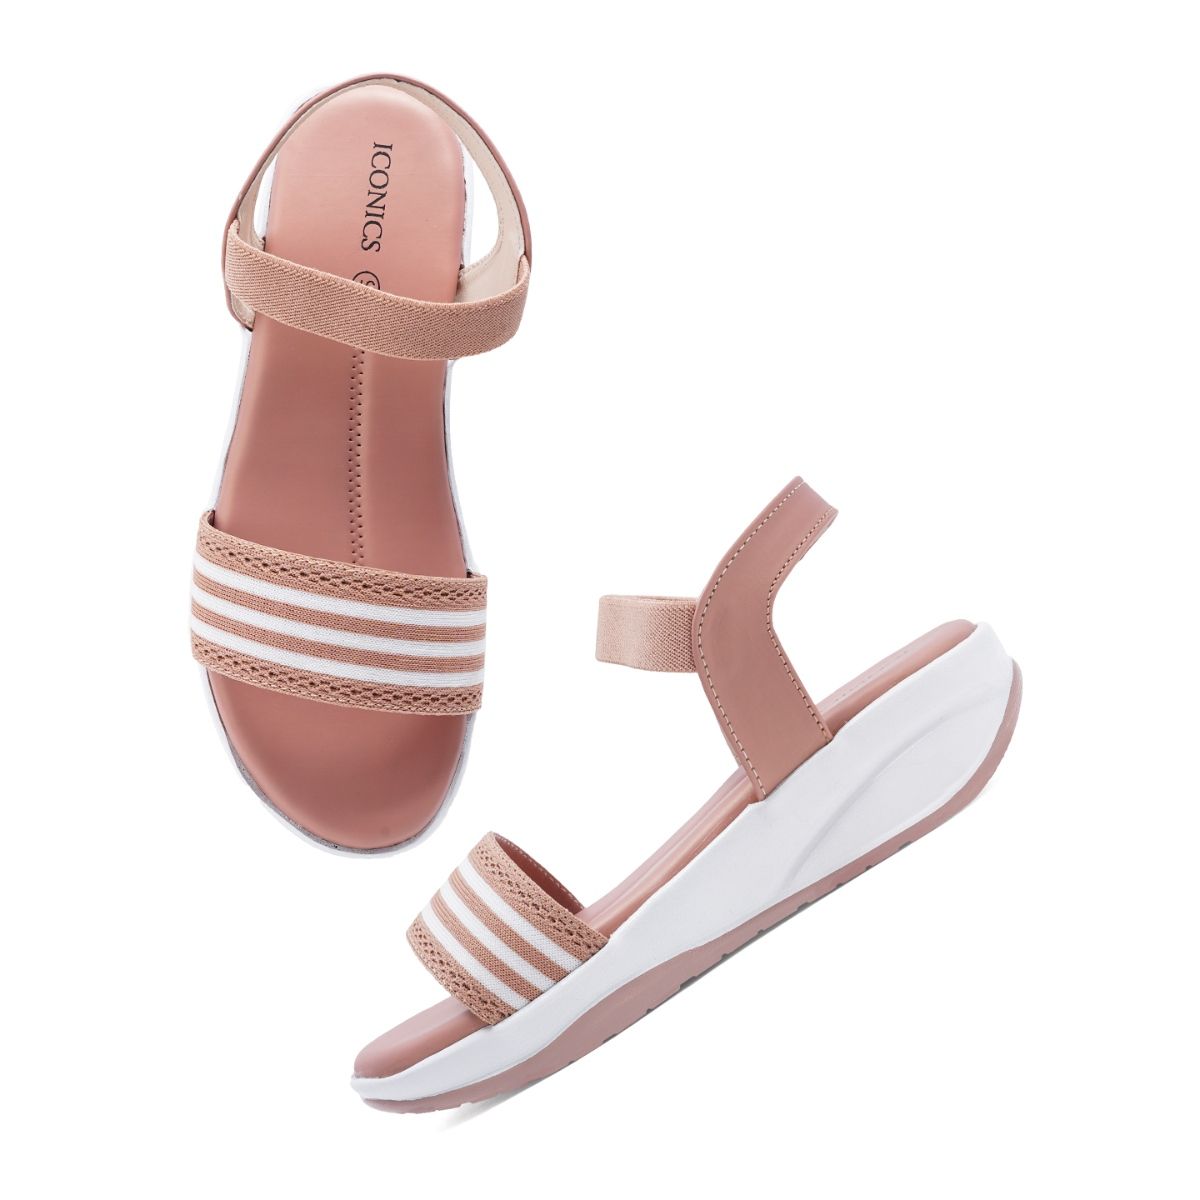 Brand New In Box Authentic Hermes Chypre Pink Aphrodite Suede Sandal size  36 | Trendy shoes, Trendy shoes sneakers, Popular sandals